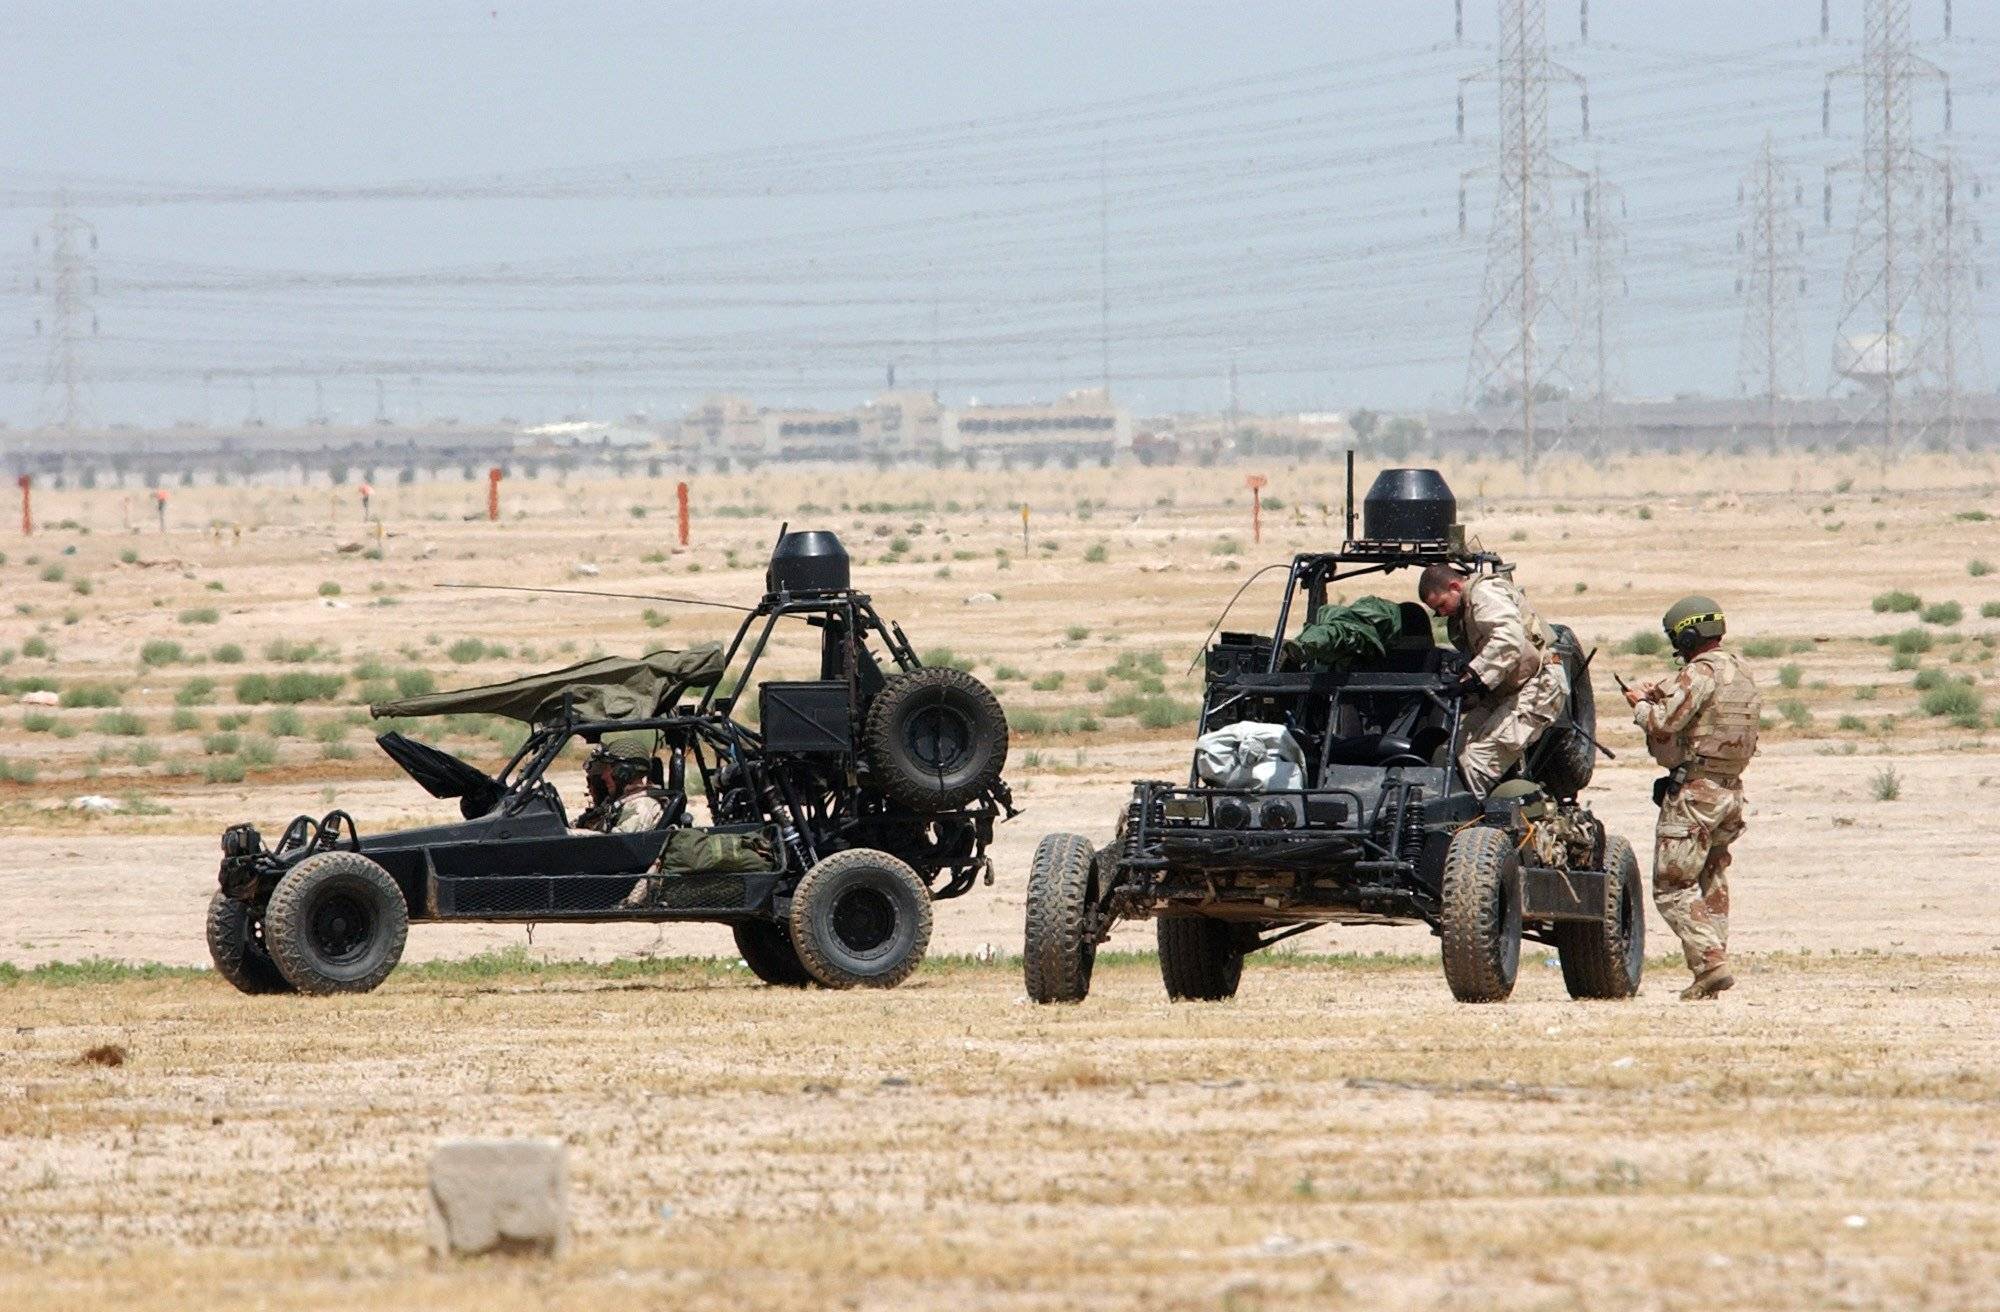 Camp Doha, Kuwait (Feb. 13, 2002) - U.S. Navy SEALs (SEa, Air, Land) operate Desert Patrol Vehicles (DPV) while preparing for an upcoming mission. Each “Dune Buggy